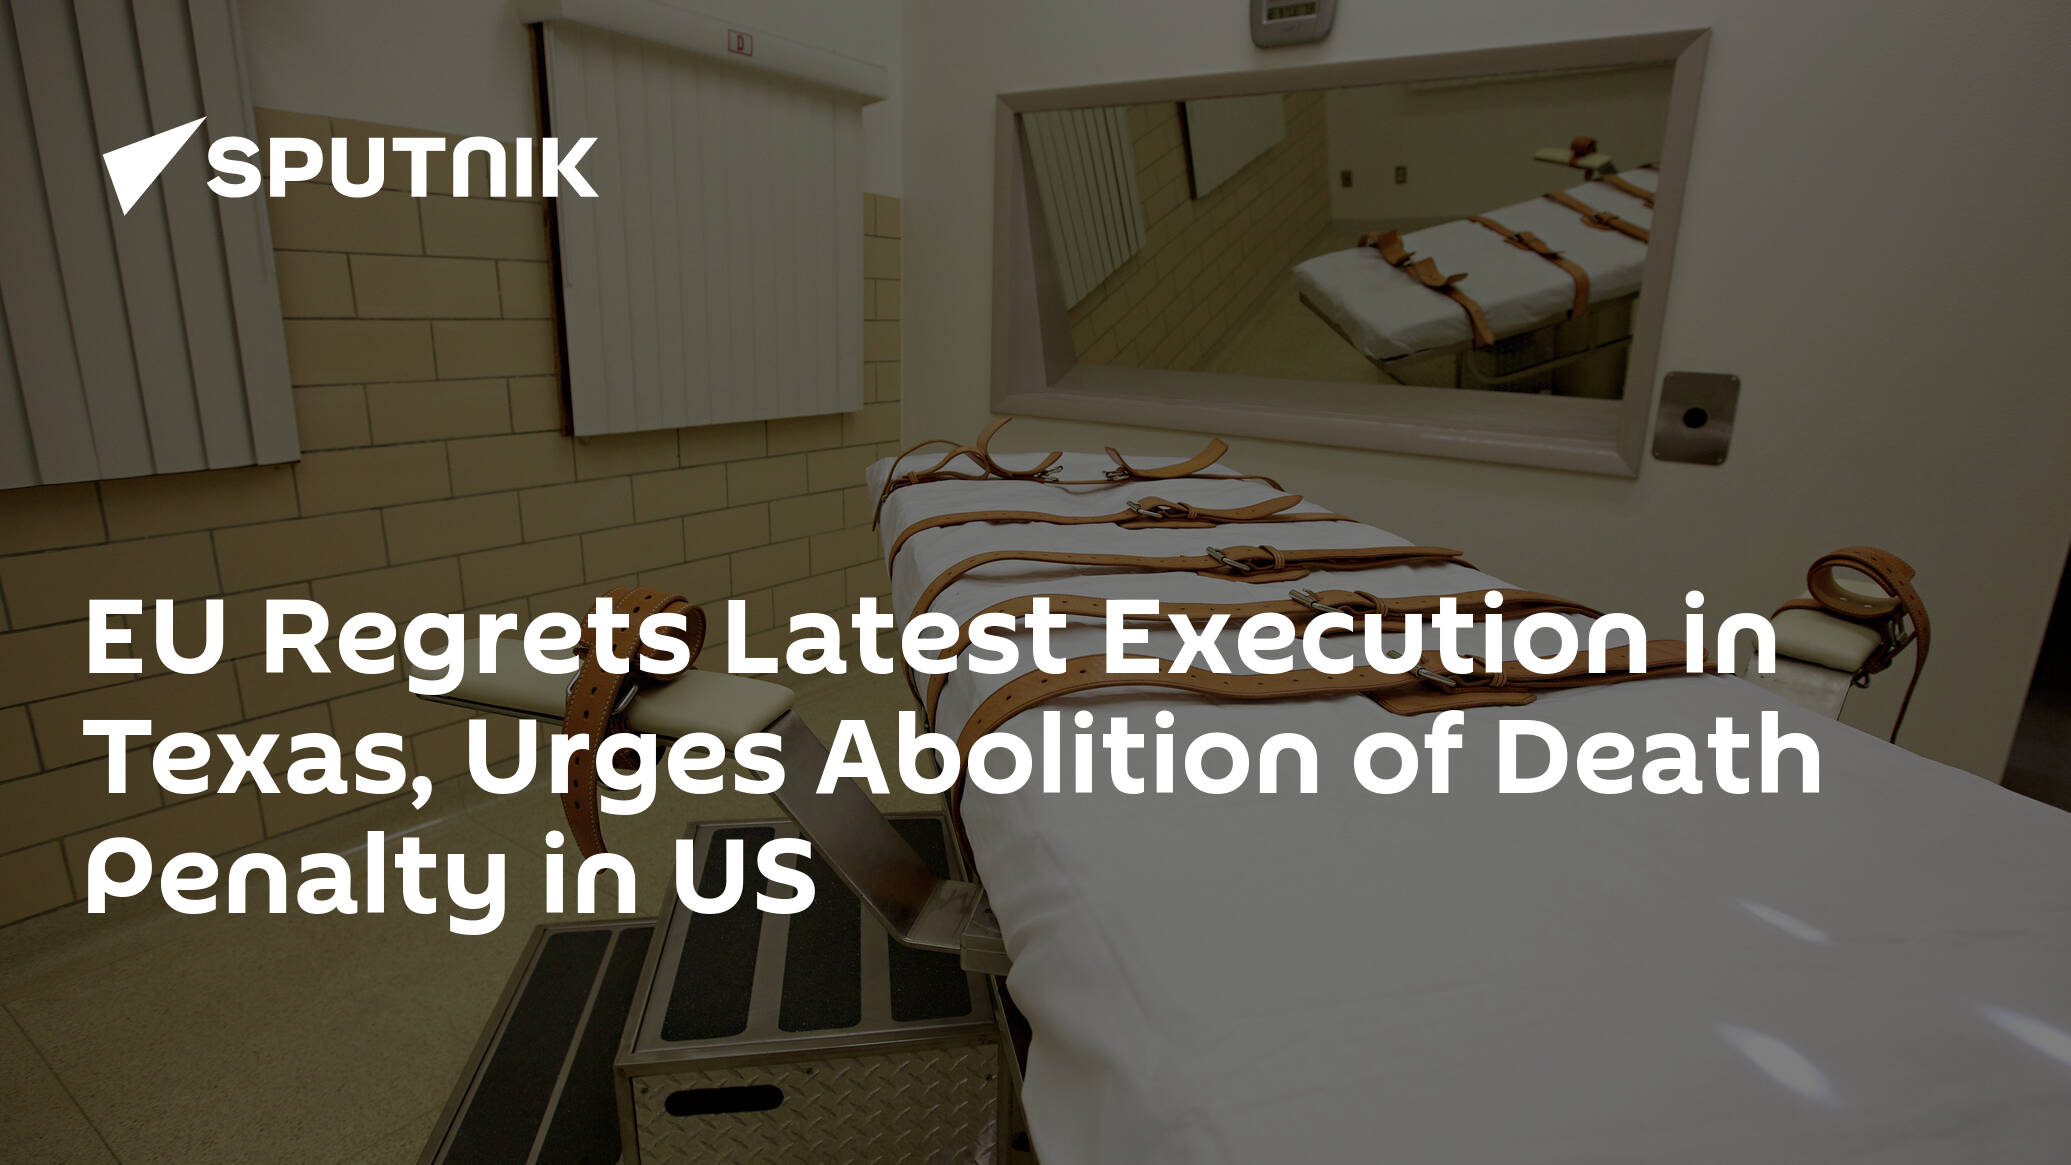 EU Regrets Latest Execution in Texas, Urges Abolition of Death Penalty in US